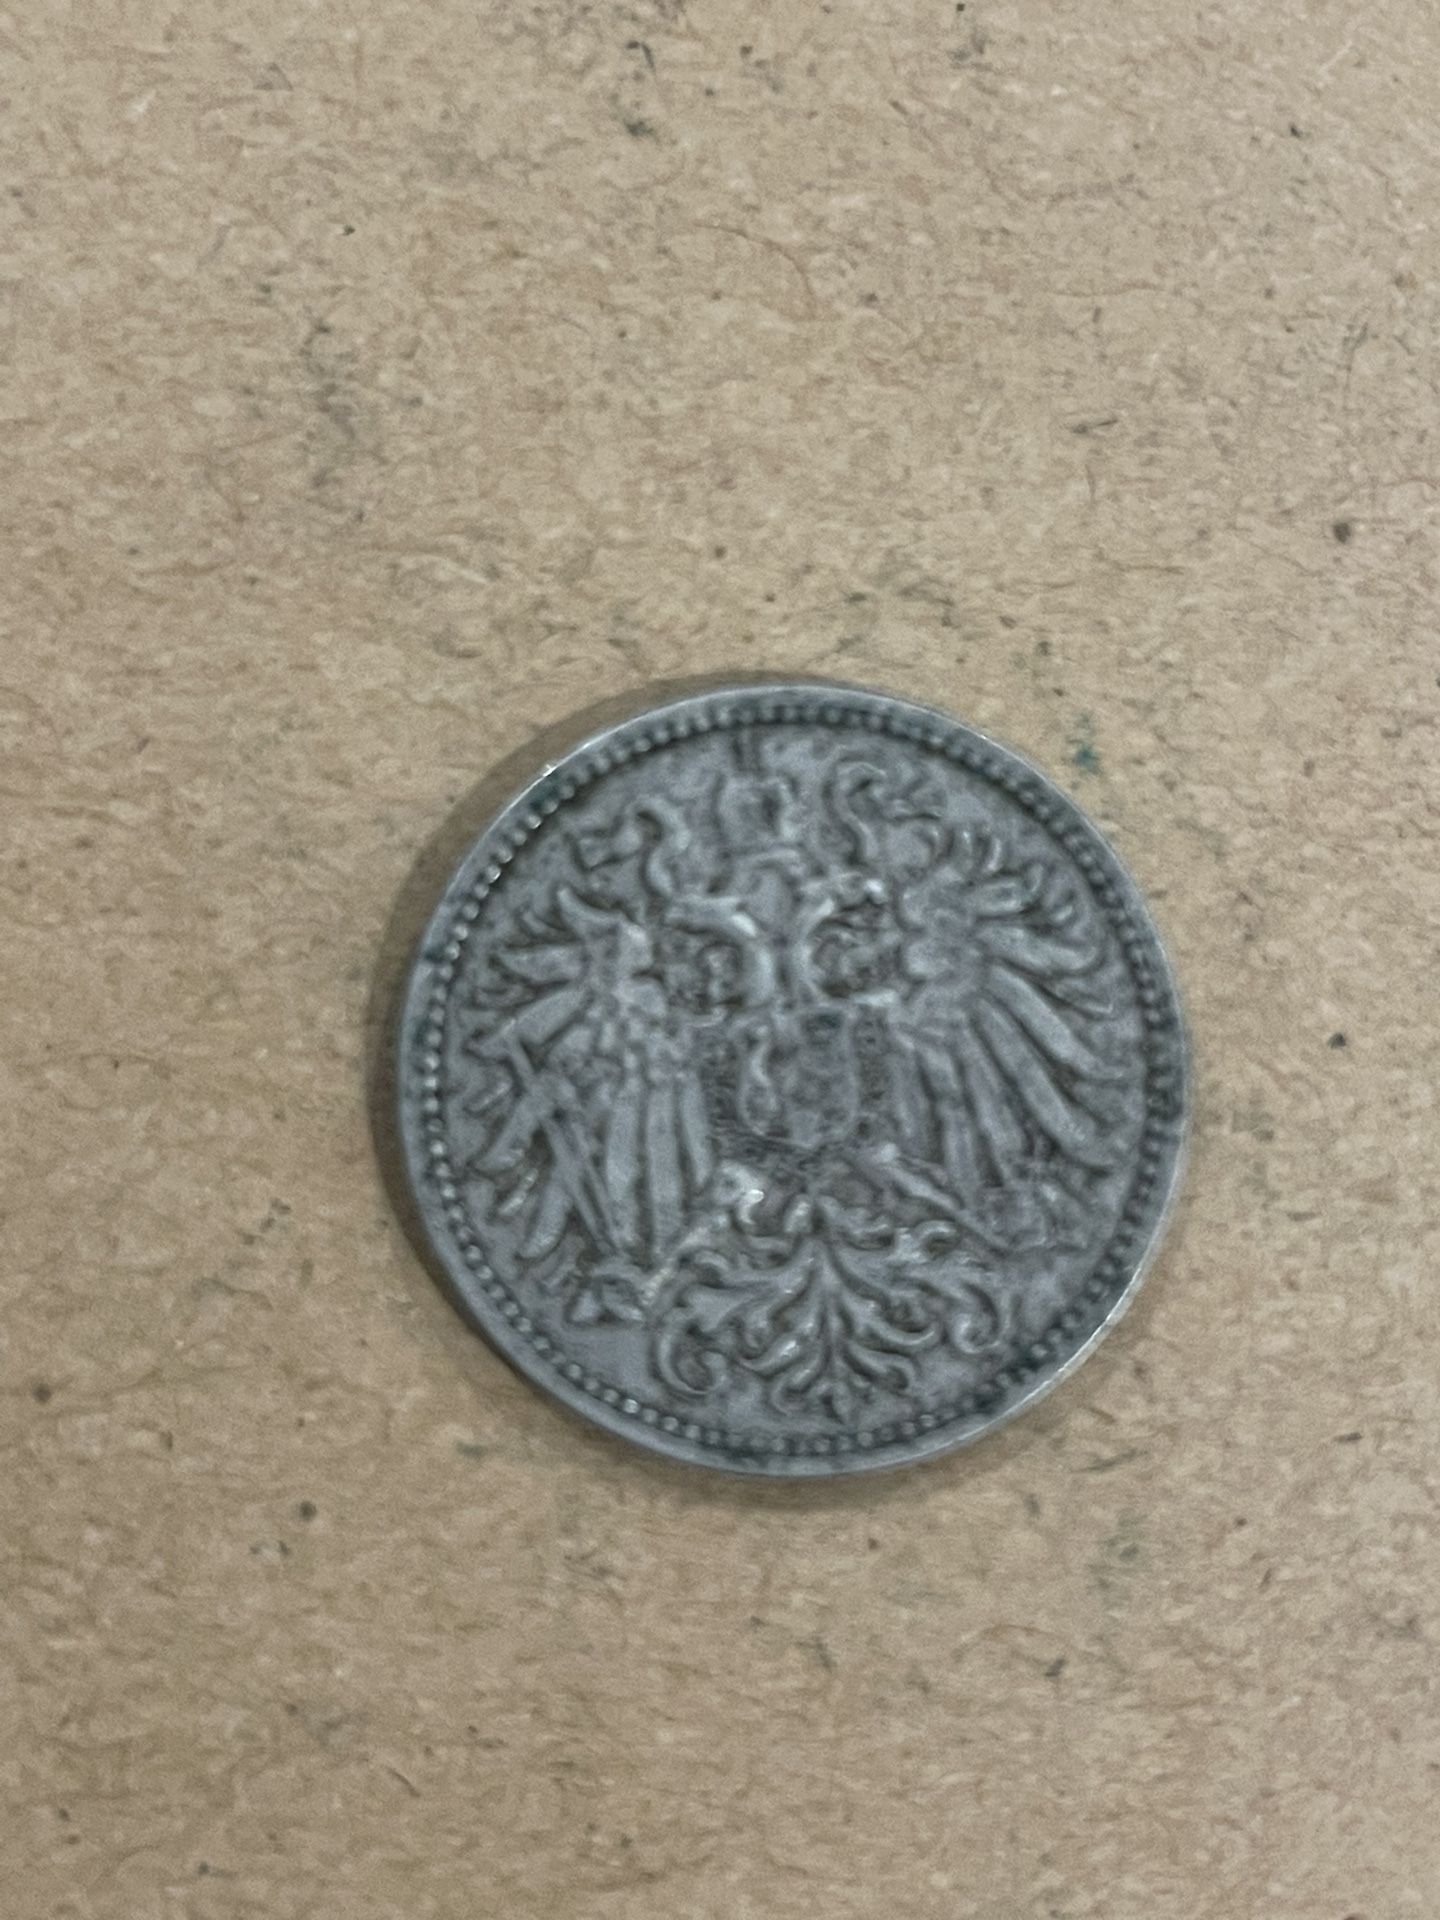 1895 German 10 Cent Coin